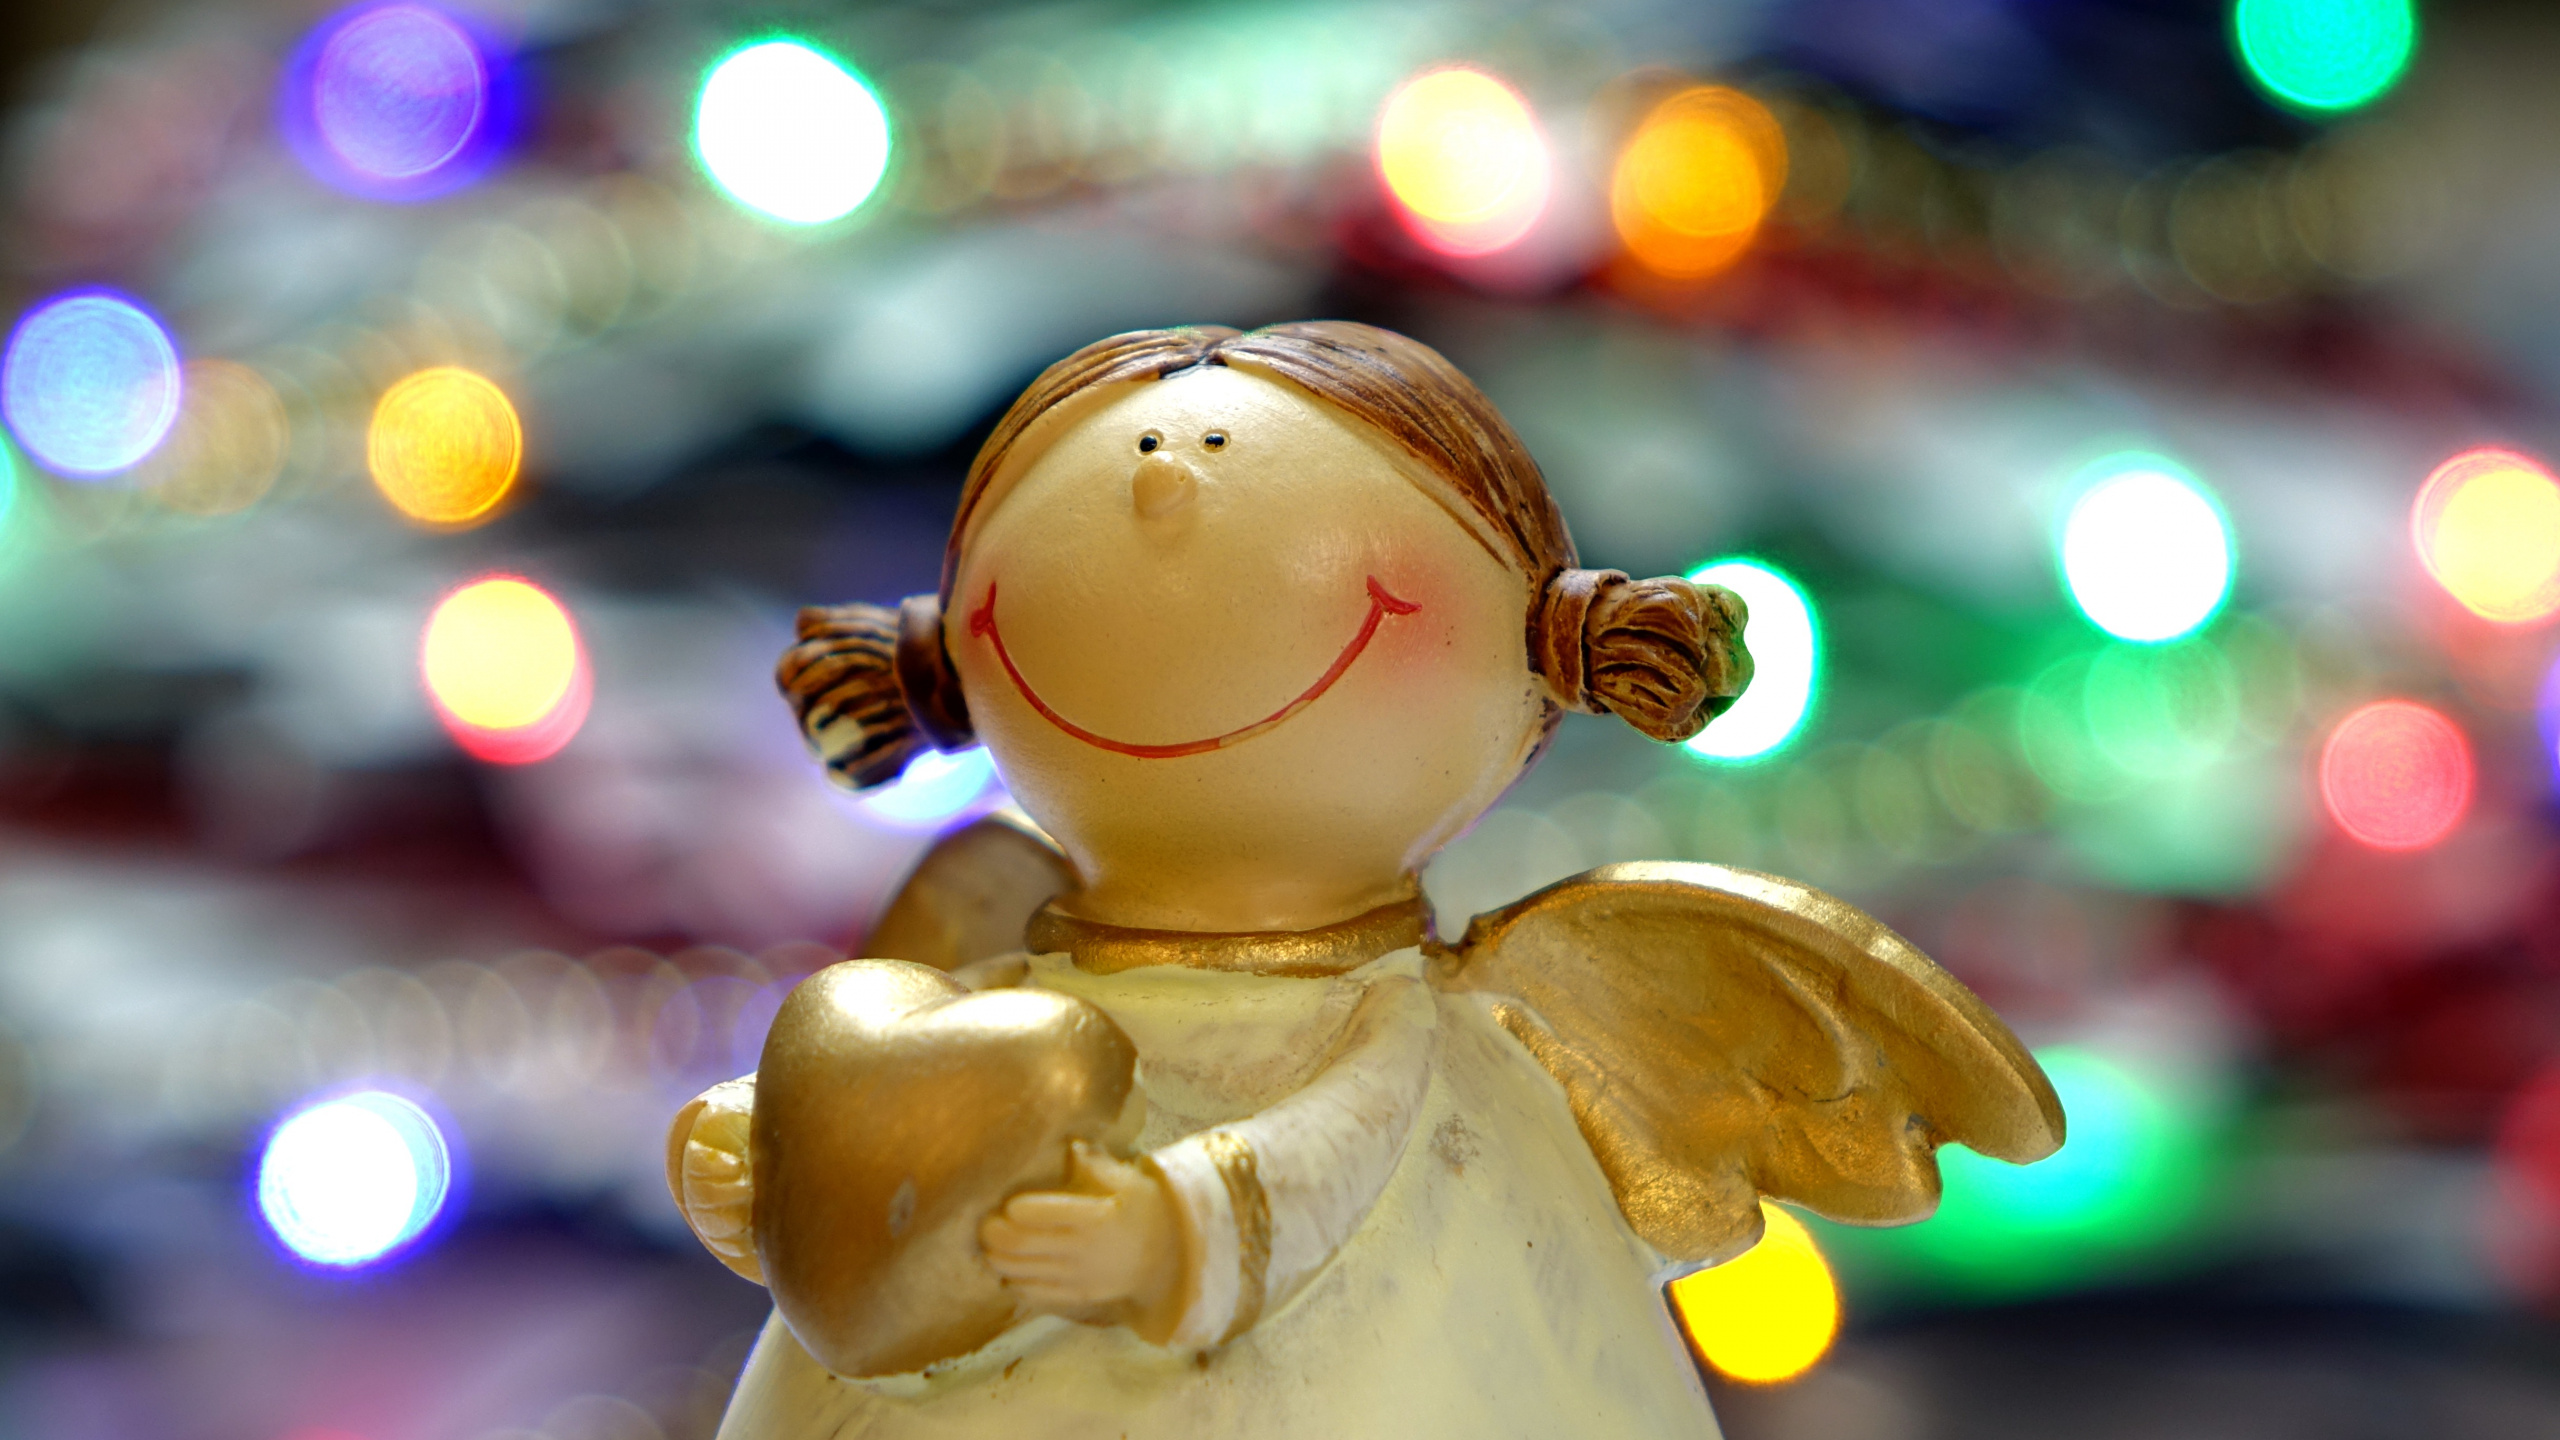 White Angel Ceramic Figurine in Bokeh Photography. Wallpaper in 2560x1440 Resolution